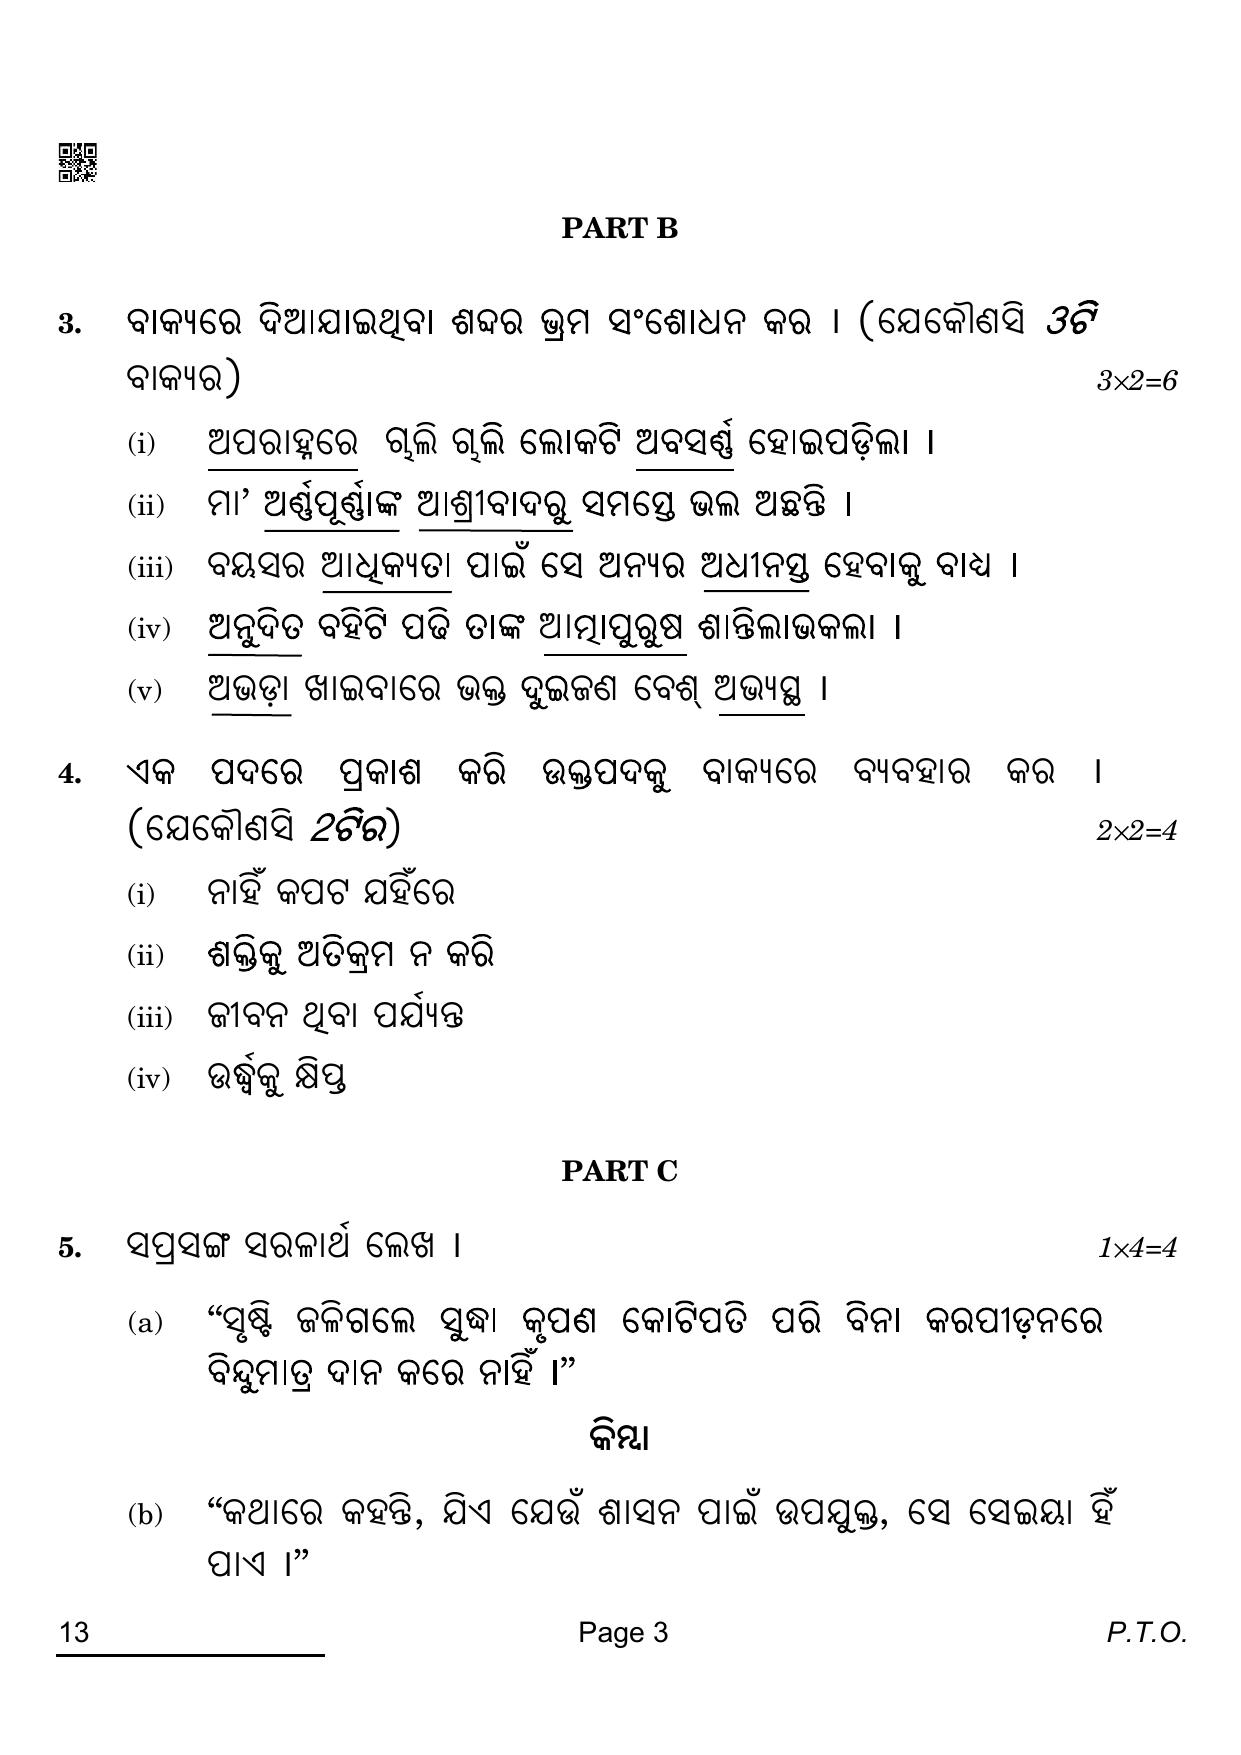 CBSE Class 12 13 ODIA 2022 Compartment Question Paper - Page 3